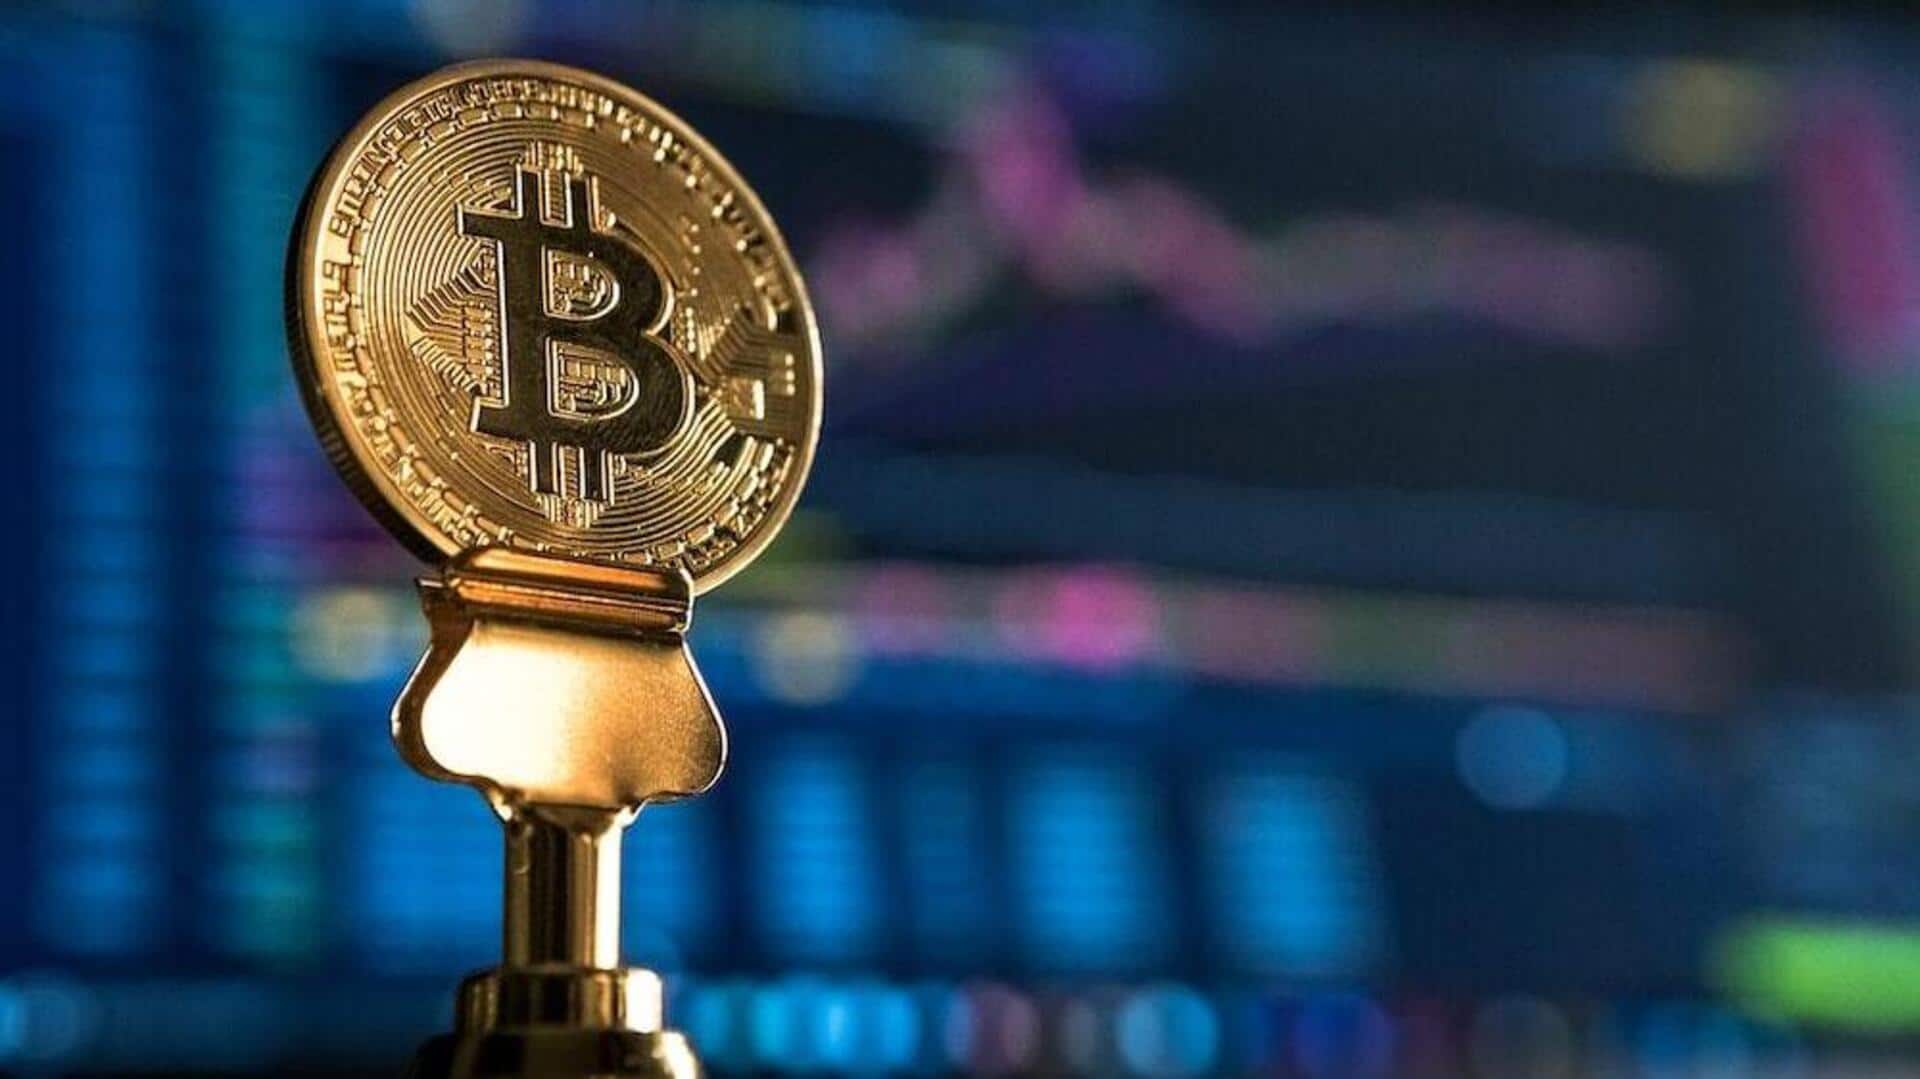 Today's cryptocurrency prices: Check rates of Bitcoin, Dogecoin, Tether, Solana